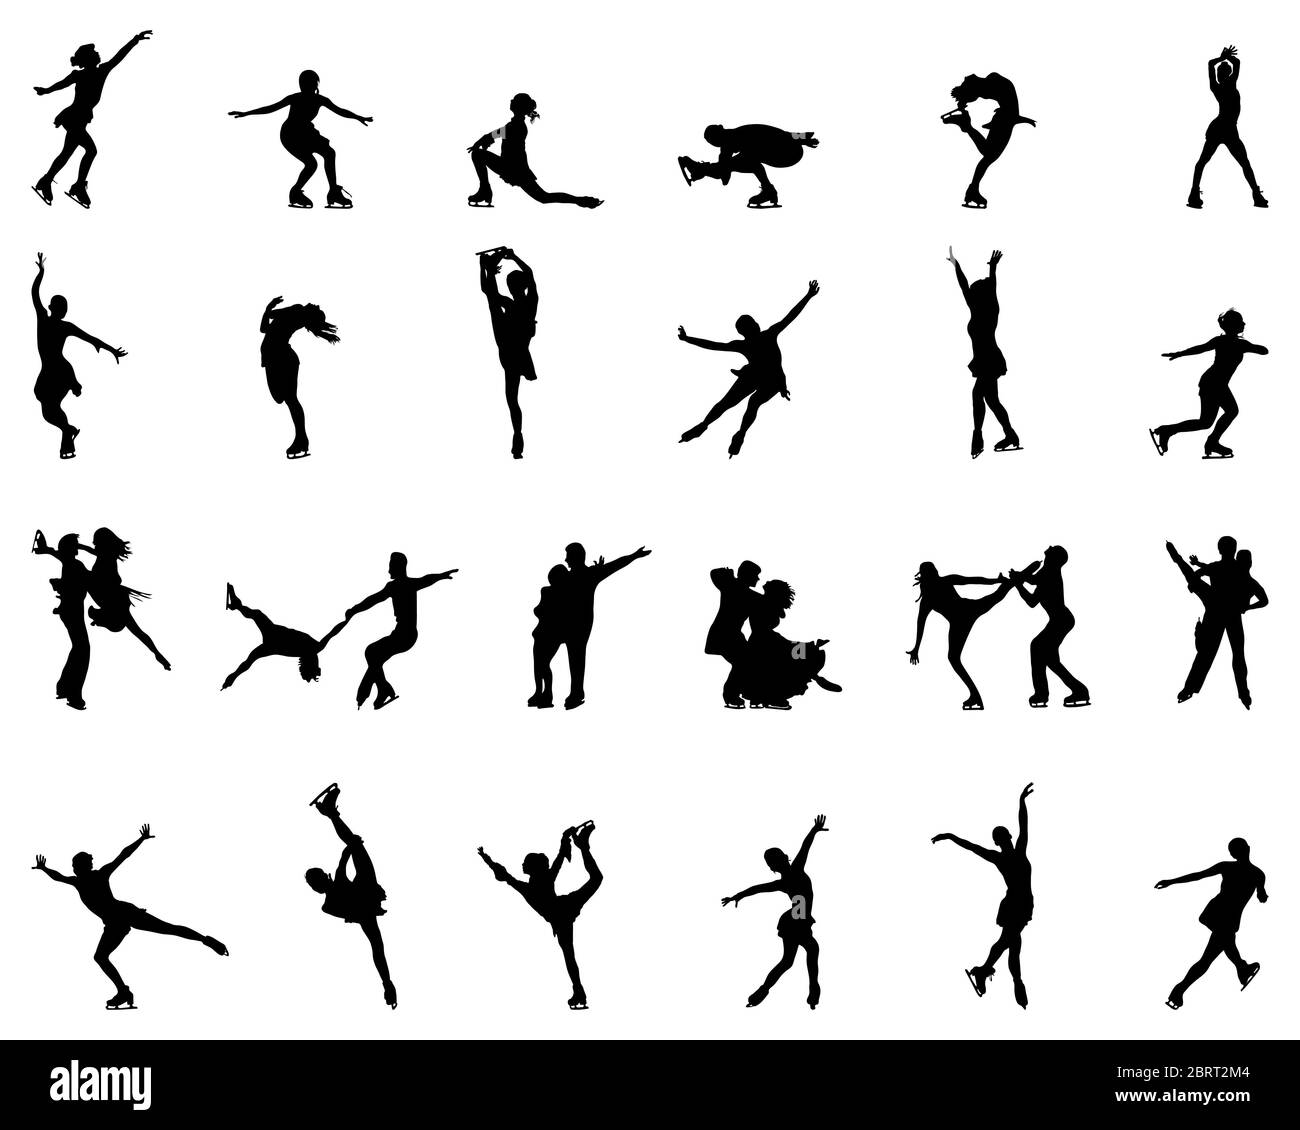 Black silhouettes of skating on a white background Stock Photo